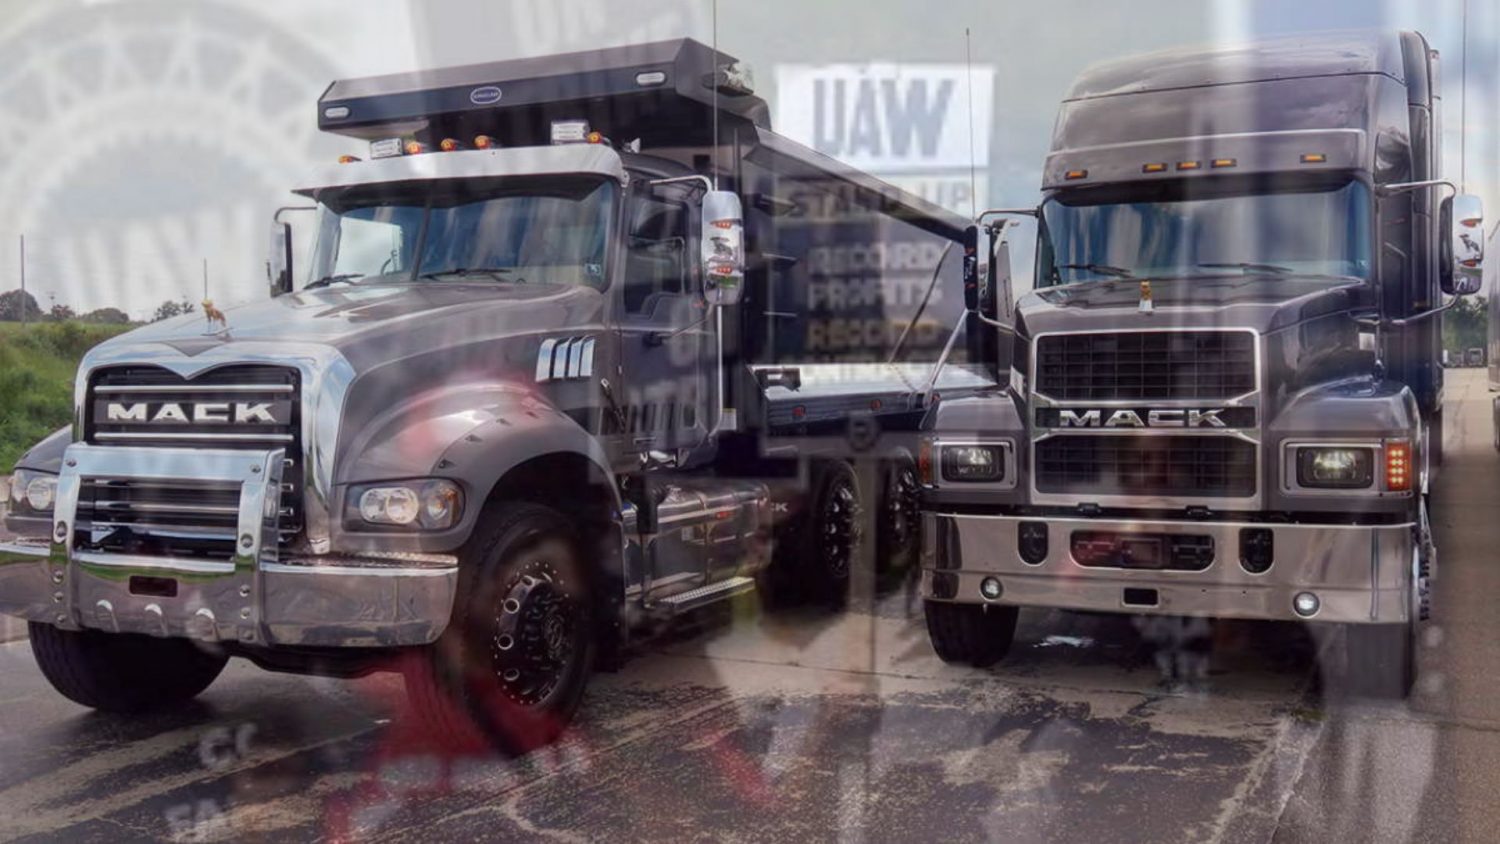 The Mack Trucks agreement was seen as a possible test of whether employees would agree to ratify a contract that fell short of high demands.